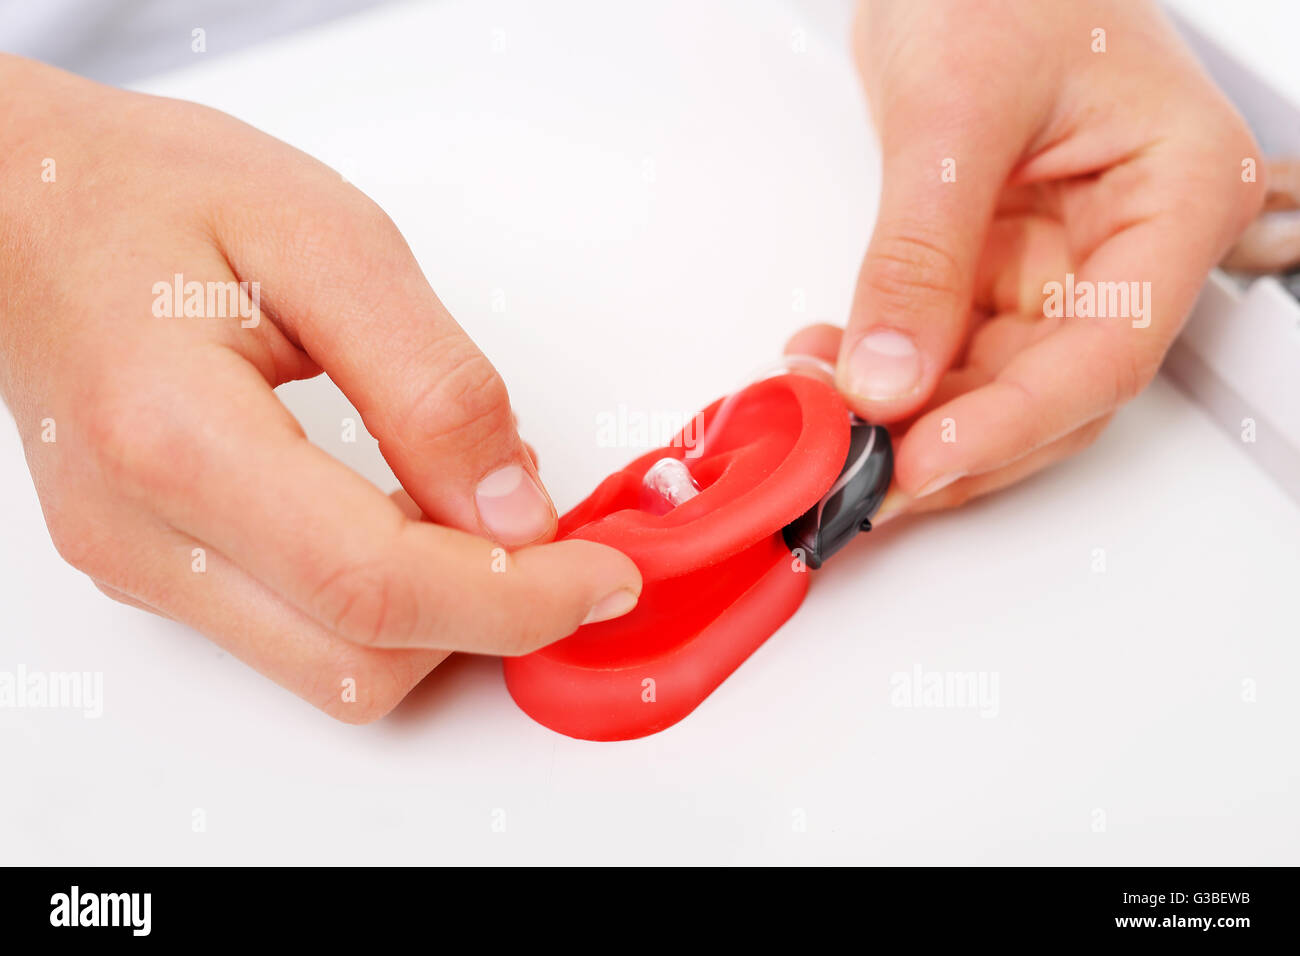 How to wear a hearing aid? Stock Photo